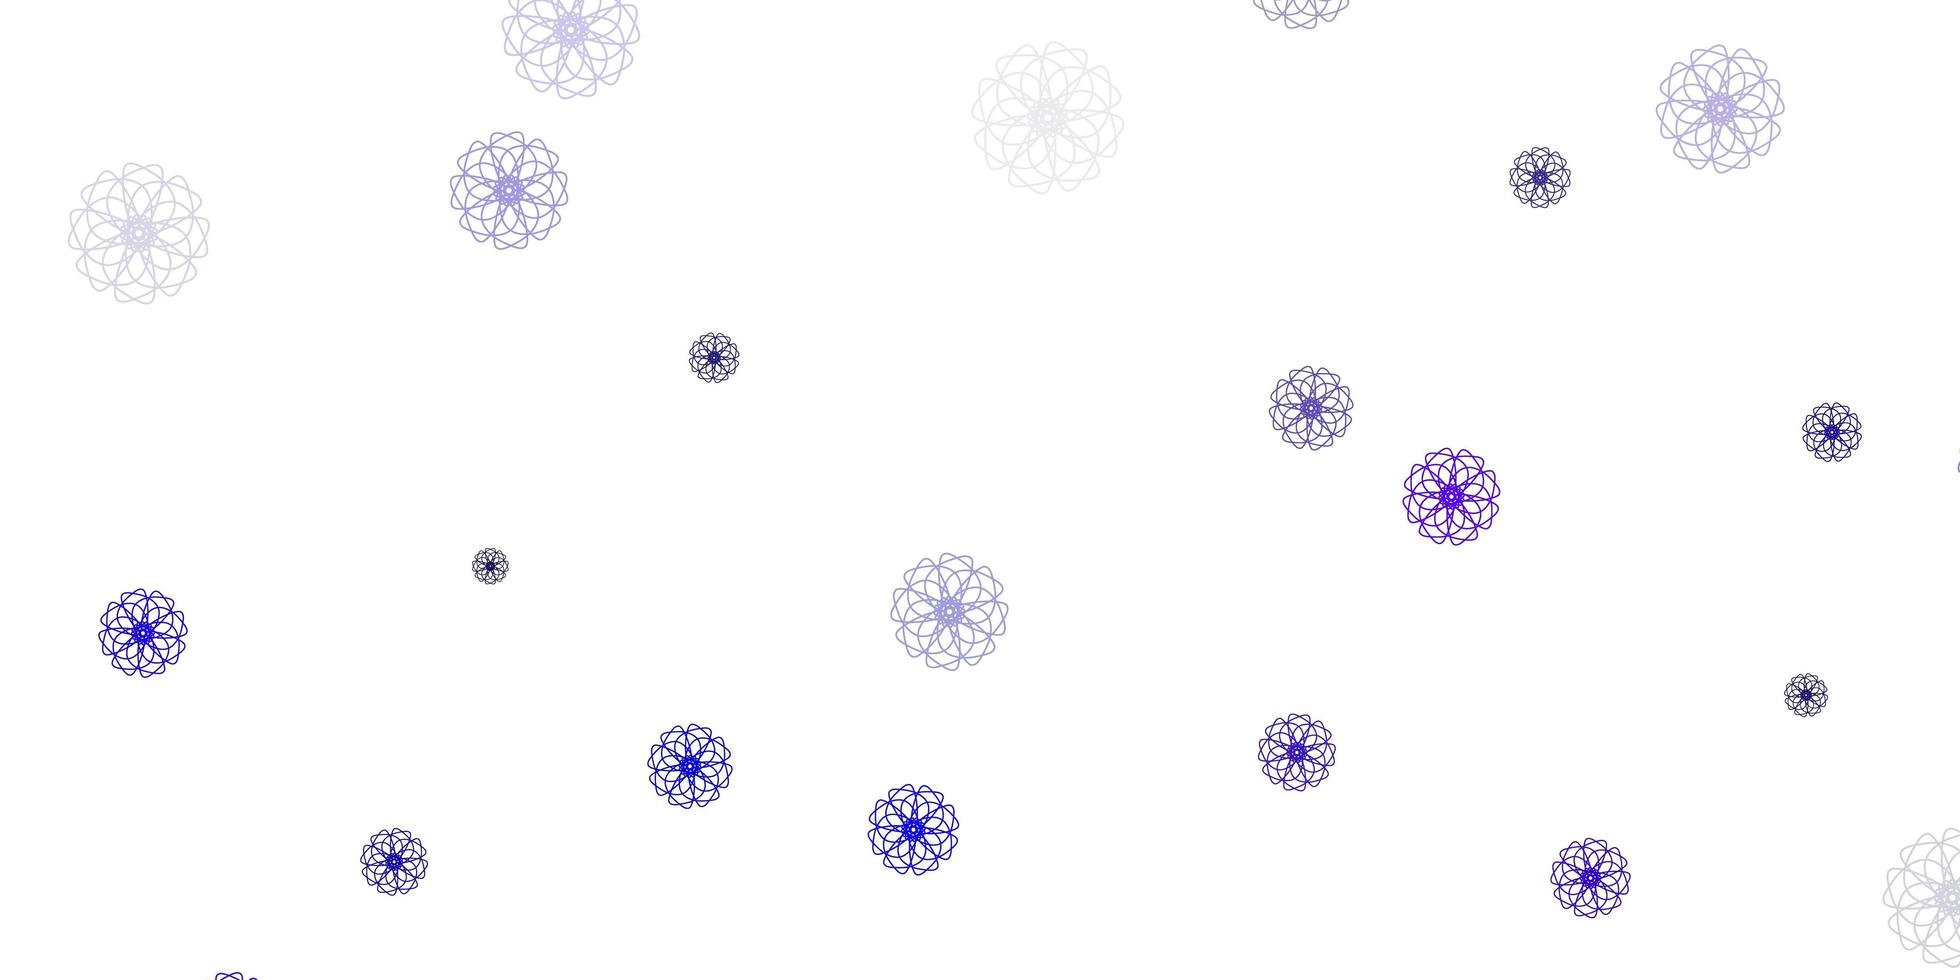 Light purple vector natural layout with flowers.